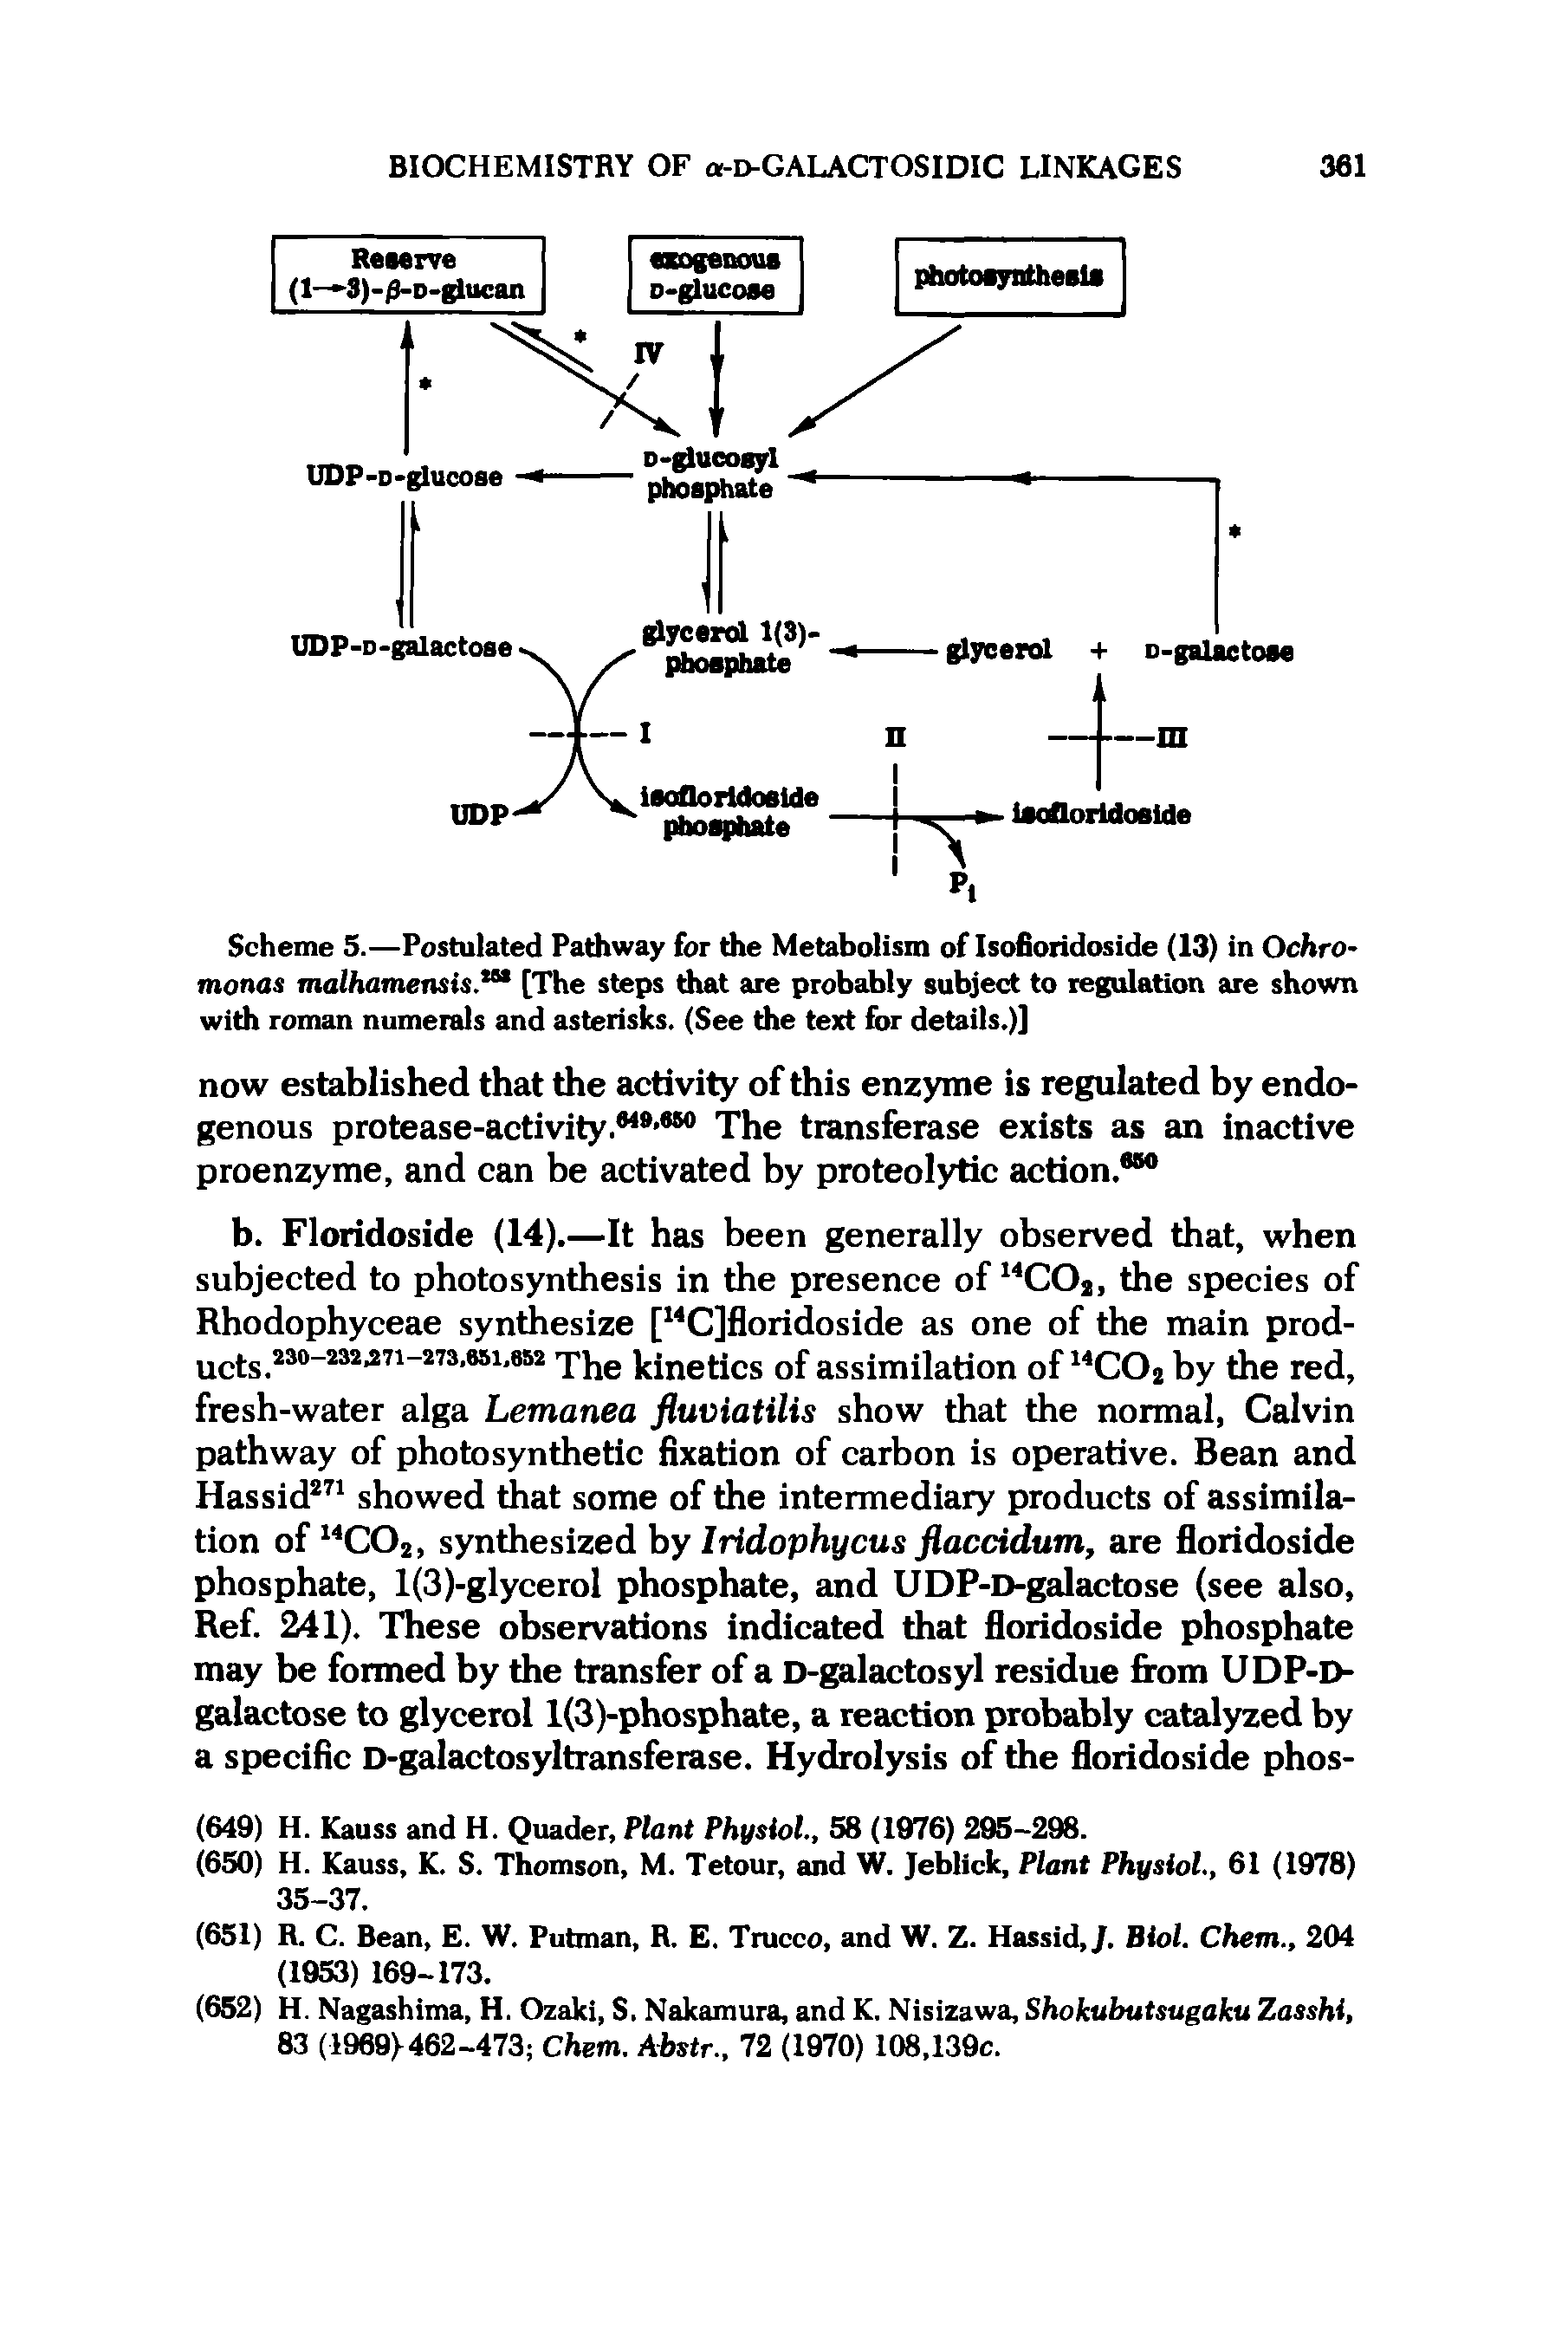 Scheme 5.—Postulated Pathway for the Metabolism of Isofioridoside (13) in Ochro-monas malhamensis[The steps that are probably subject to regulation are shown with roman numerals and asterisks. (See the text for details.)]...